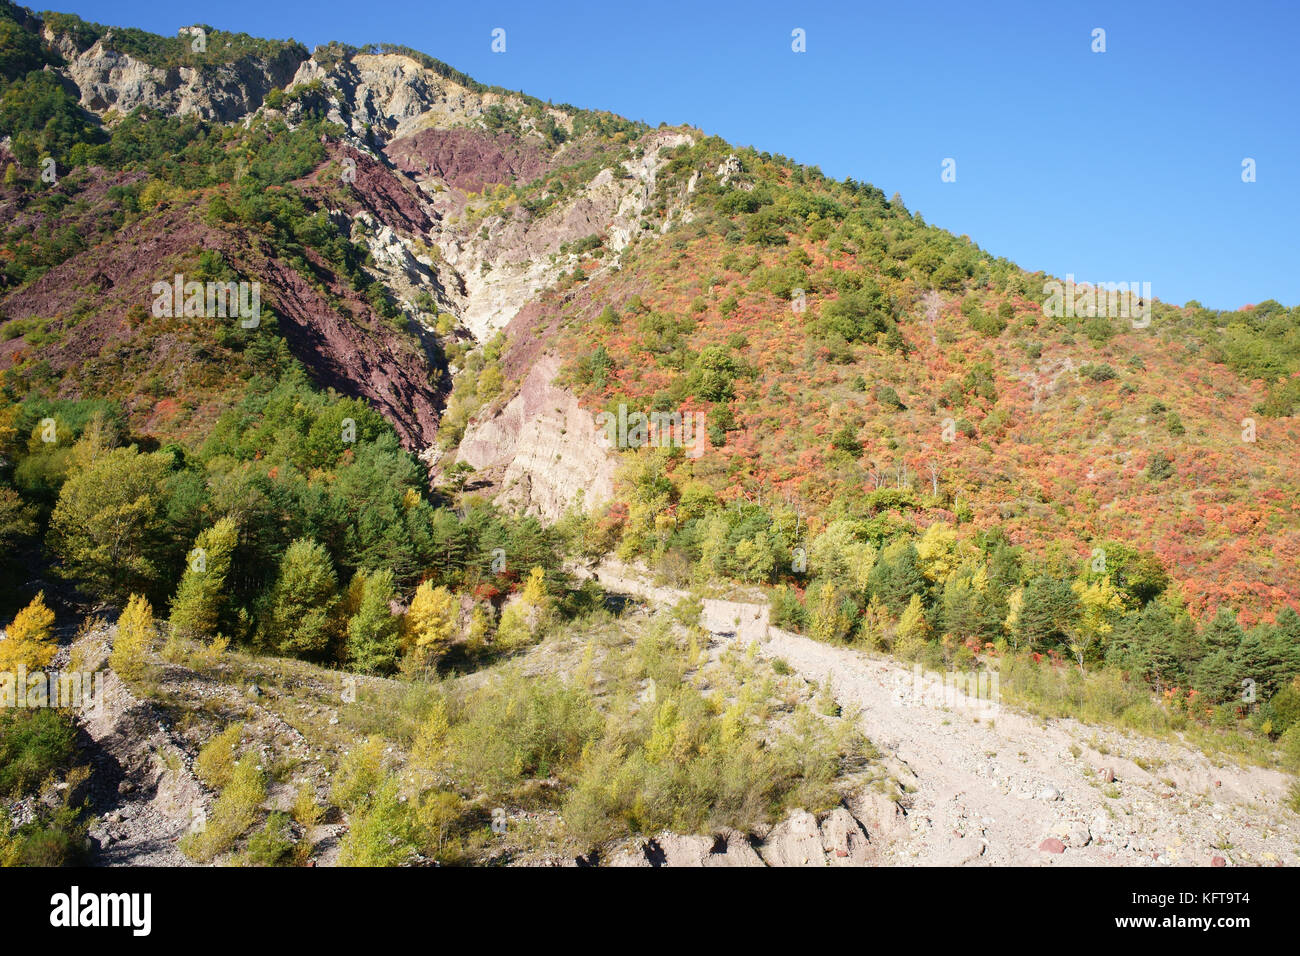 Autumnal colors and deeply eroded mountainside in the Tinée Valley. Saint-Sauveur-sur-Tinée, French Riviera's hinterland, Alpes-Maritimes, France. Stock Photo